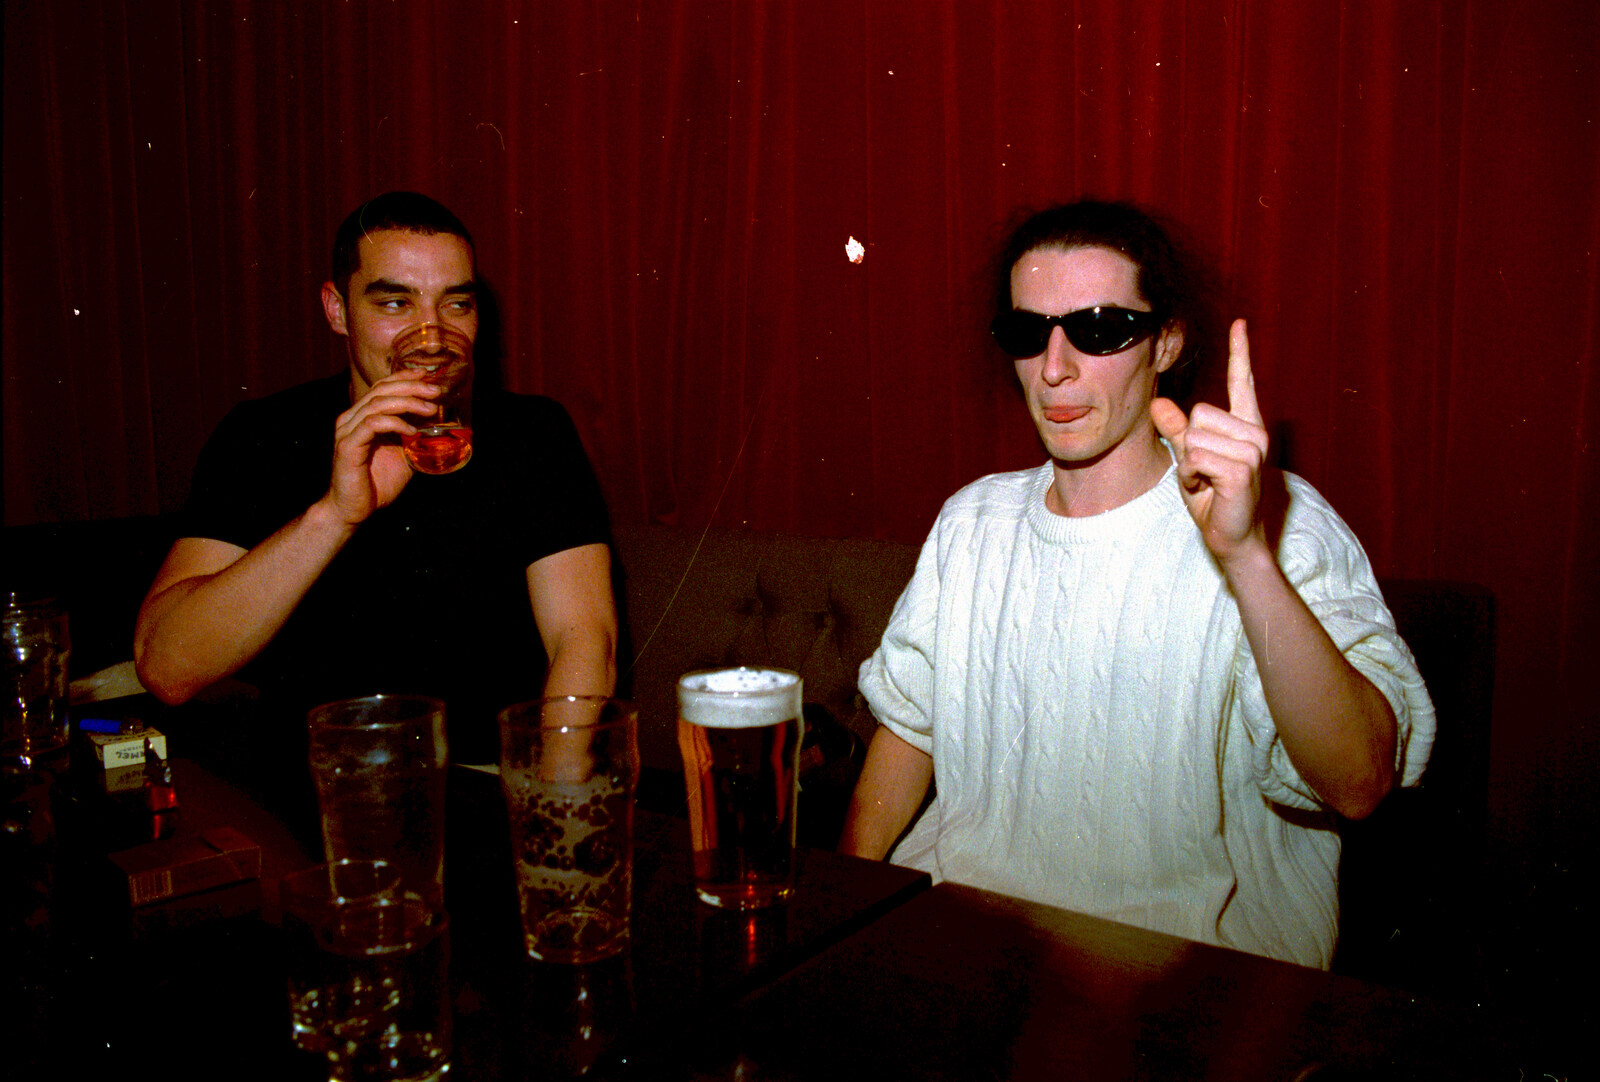 The French dude sticks a finger up from CISU Plays Cardinal's Hat in the SCC Social Club, Ipswich, Suffolk - 3rd August 1997